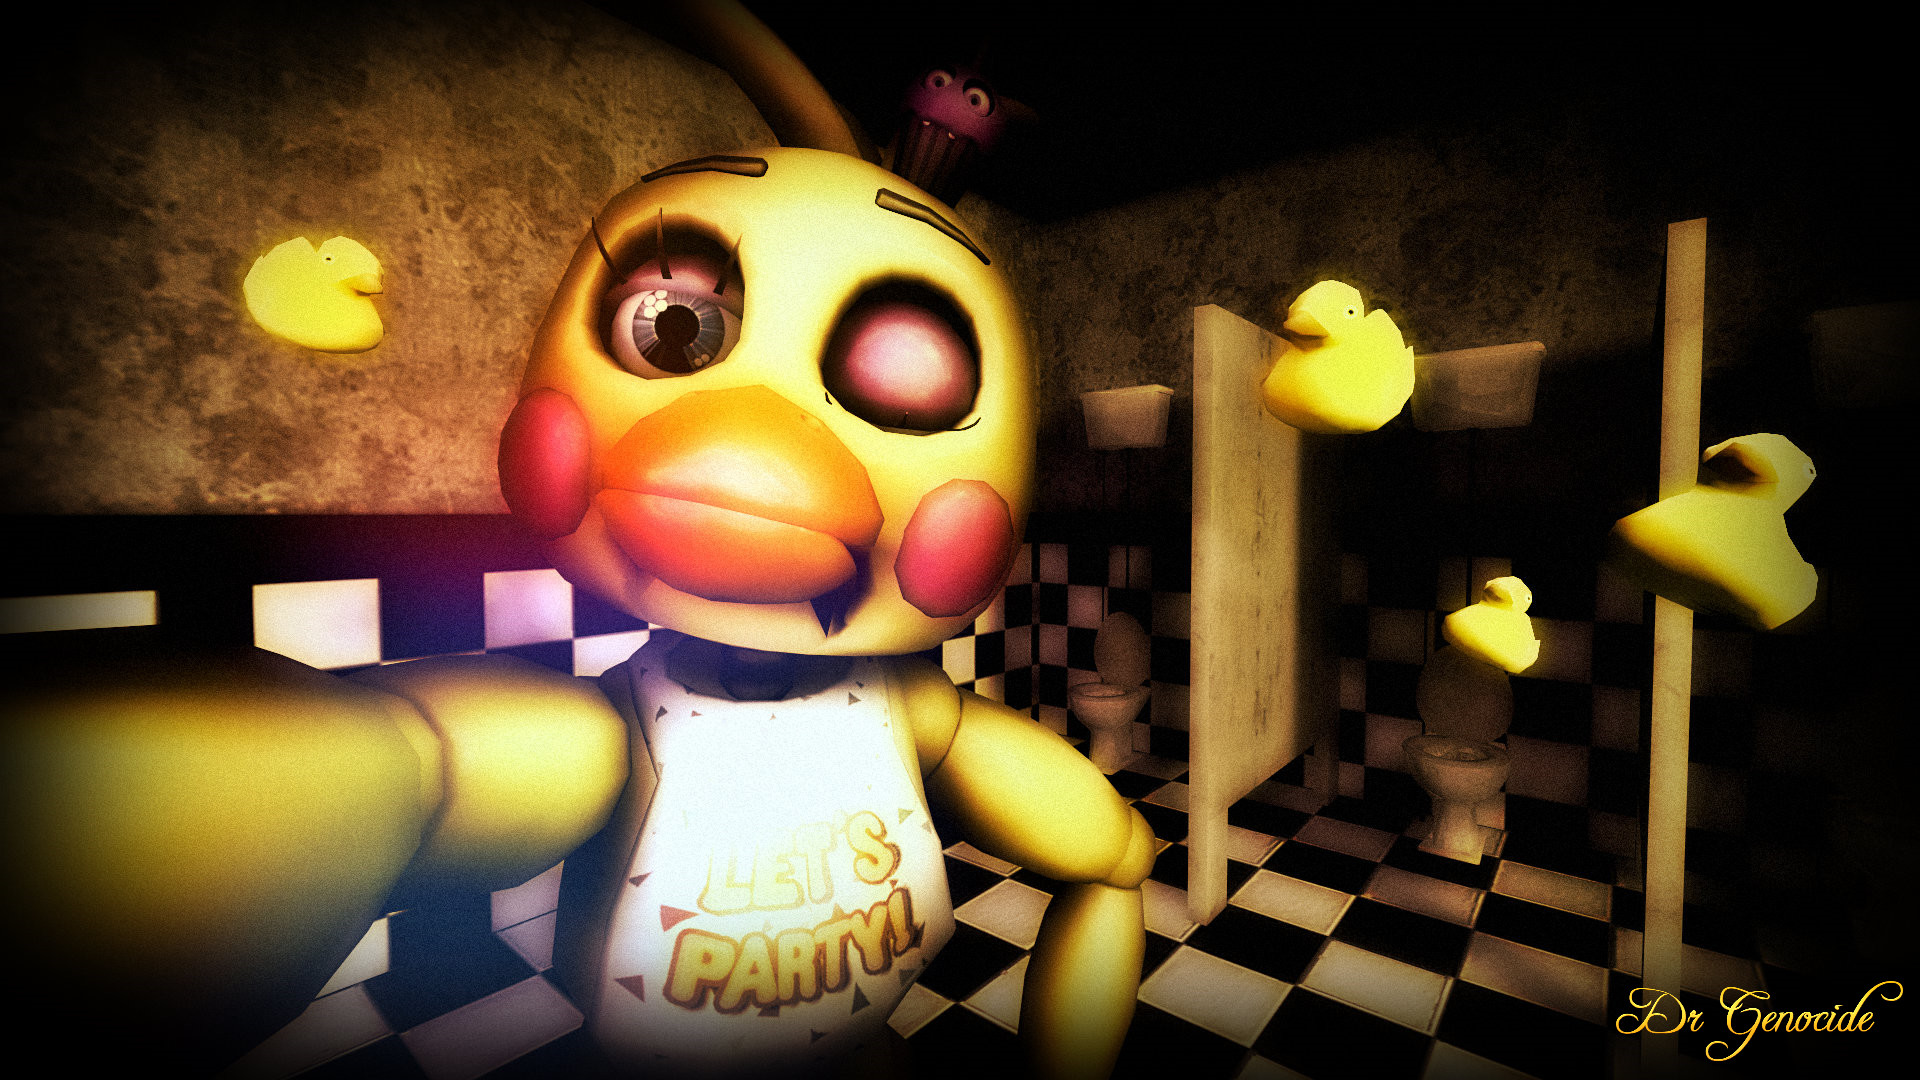 1920x1080 V.89 Toy Chica Wallpaper - Toy Chica Images